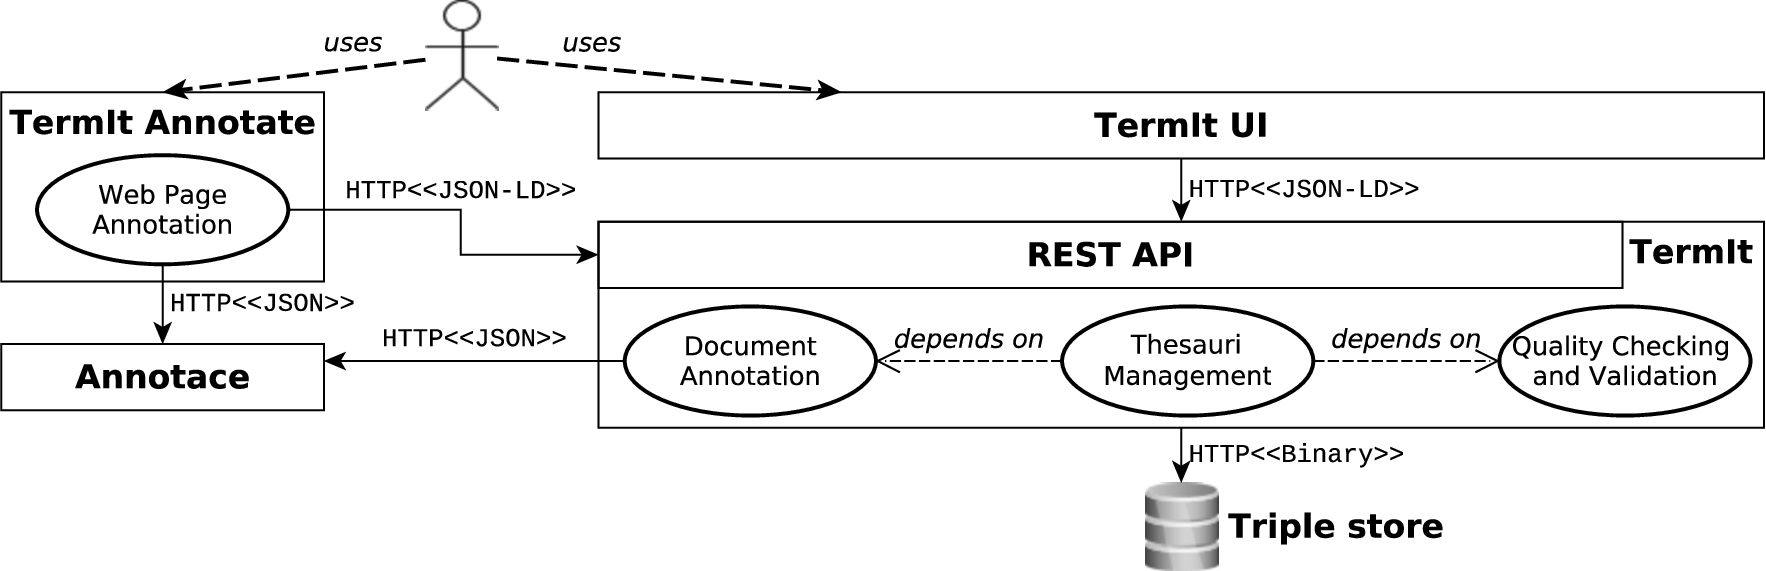 Schematic depiction of the architecture of TermIt. Annotace [17] is an external document annotation service. TermIt Annotate is a browser plugin [5] for direct web annotation. Solid edges (with labels indicating protocol and data format) represent data flow. Oval nodes within the TermIt box represent the main use cases/components with arrows indicating their interdependence.